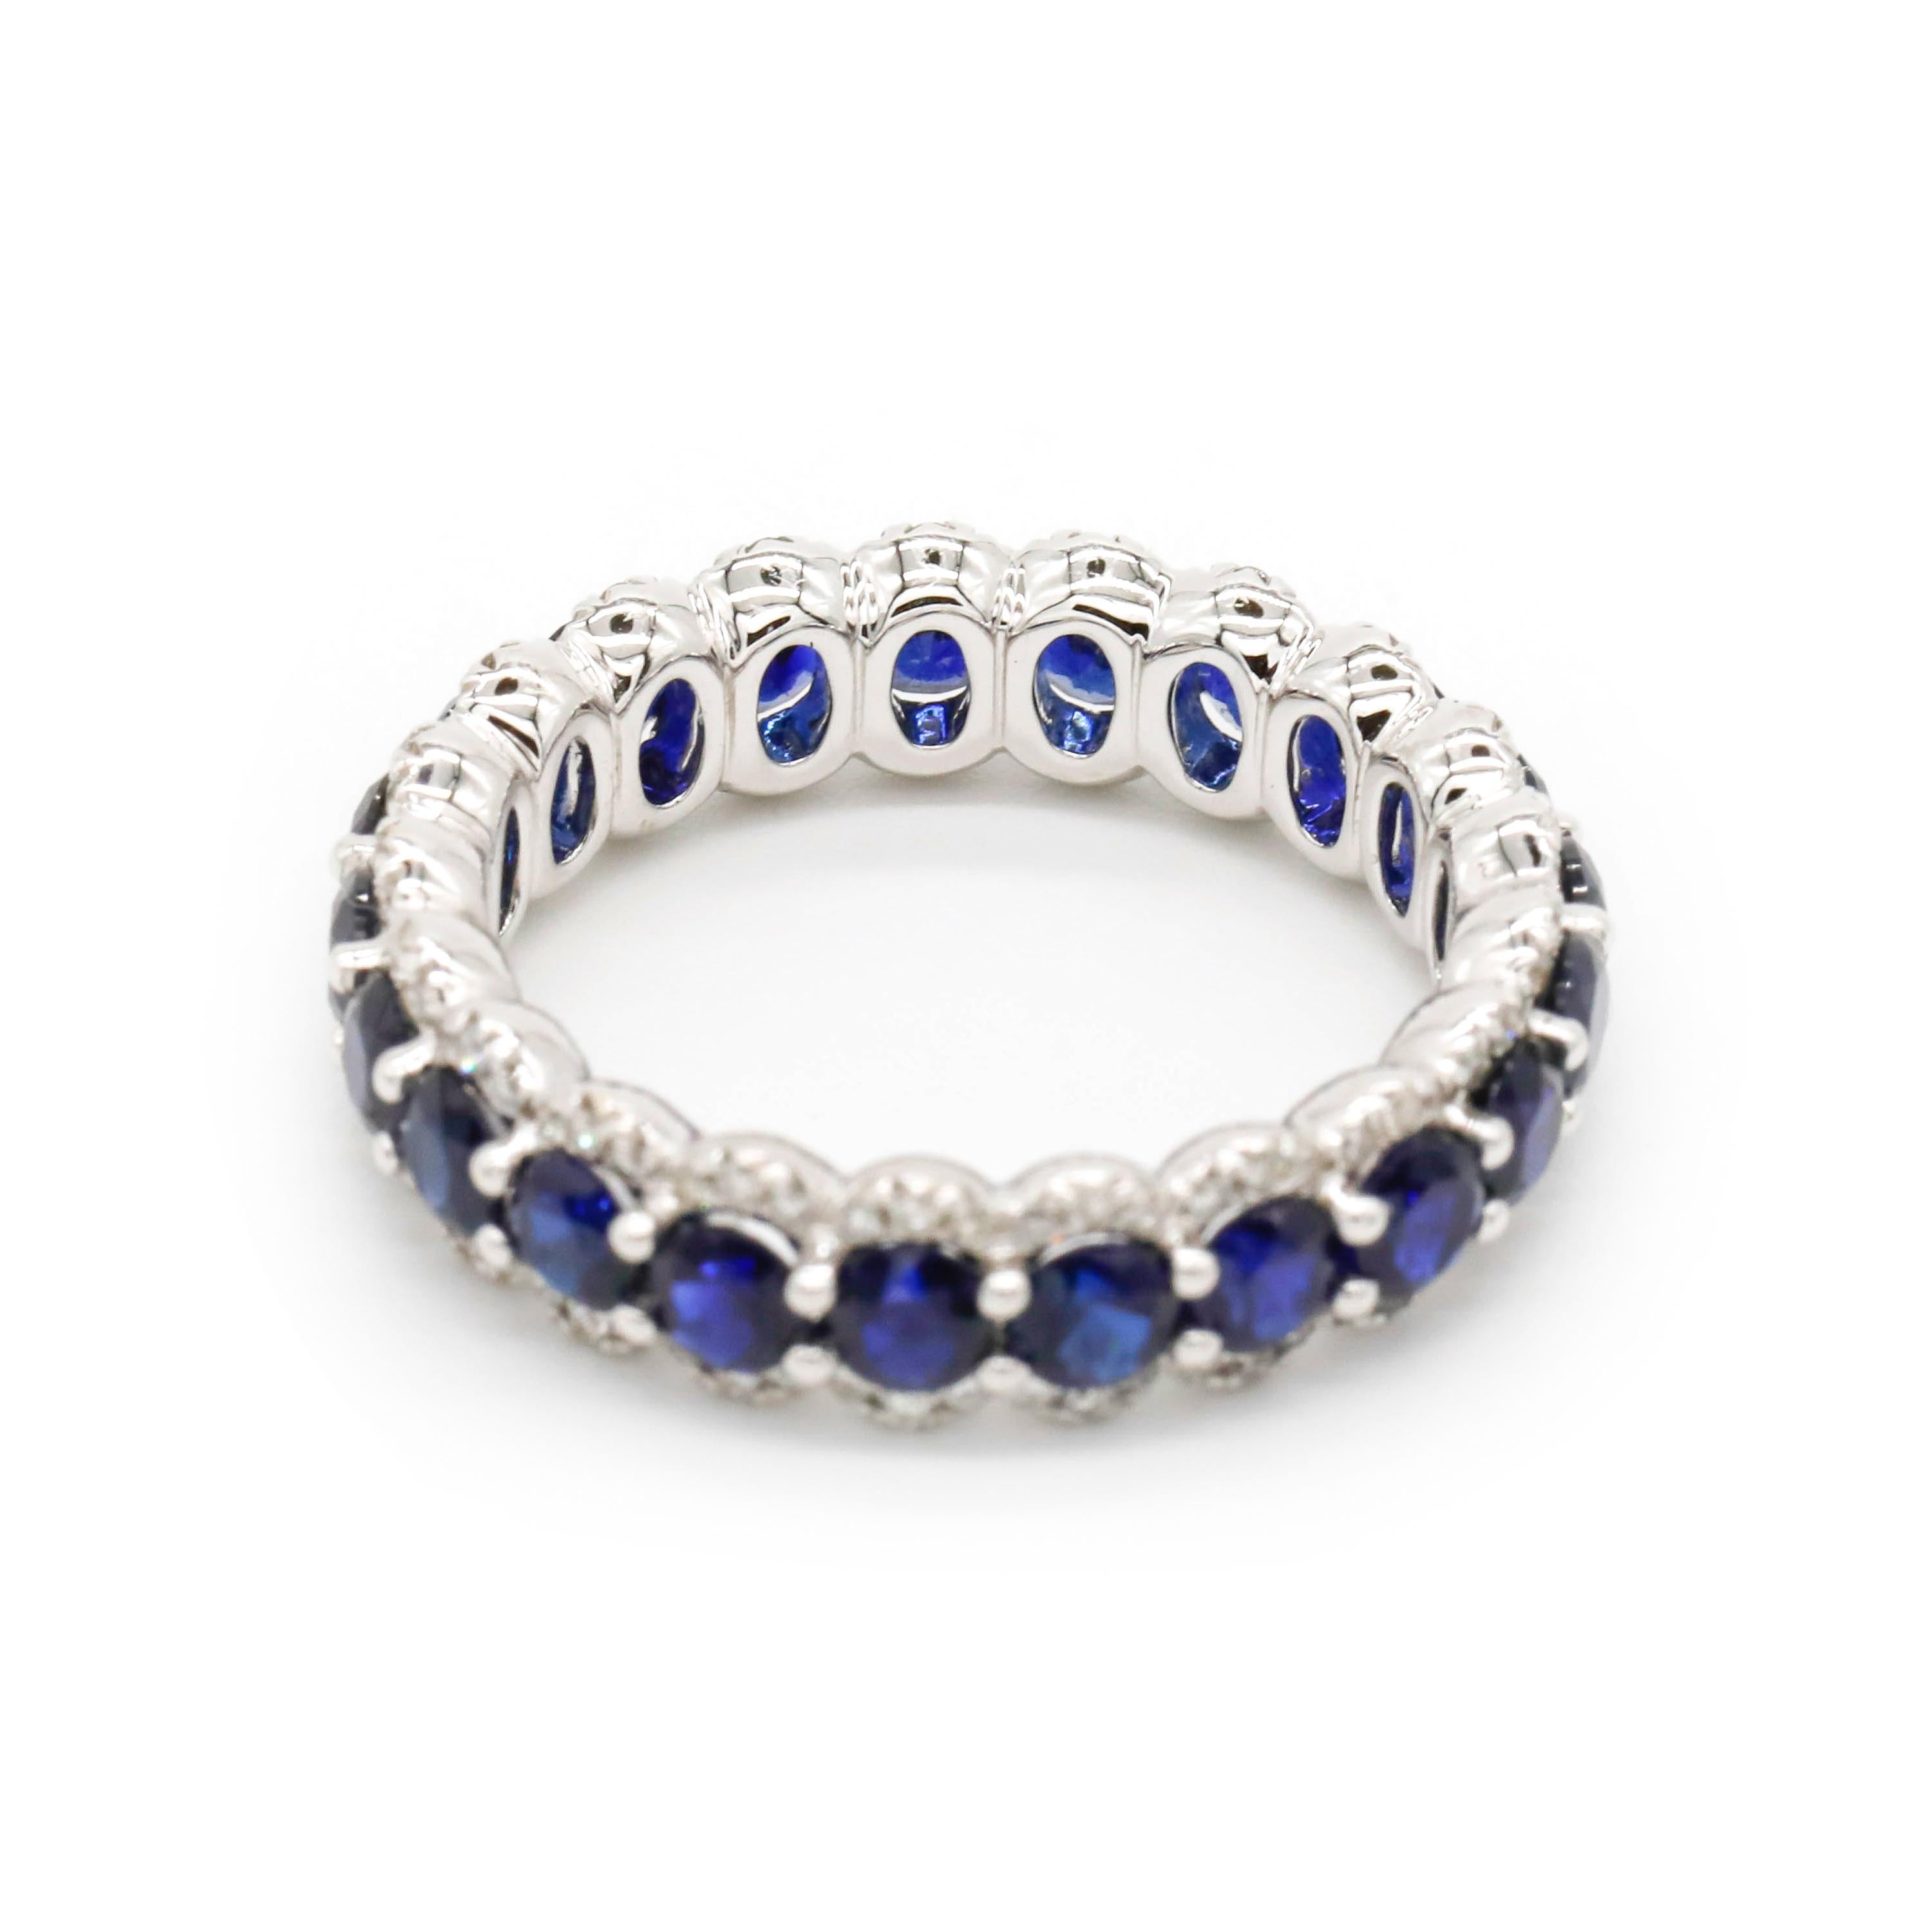 Round Cut Blue Sapphire Prong Set Diamond Eternity Band Ring in 18 k Gold White

A wedding band or an Anniversary ring - this ring is just perfection. Featuring a single row of natural blue sapphire stones of Round cut, set in a prong setting.